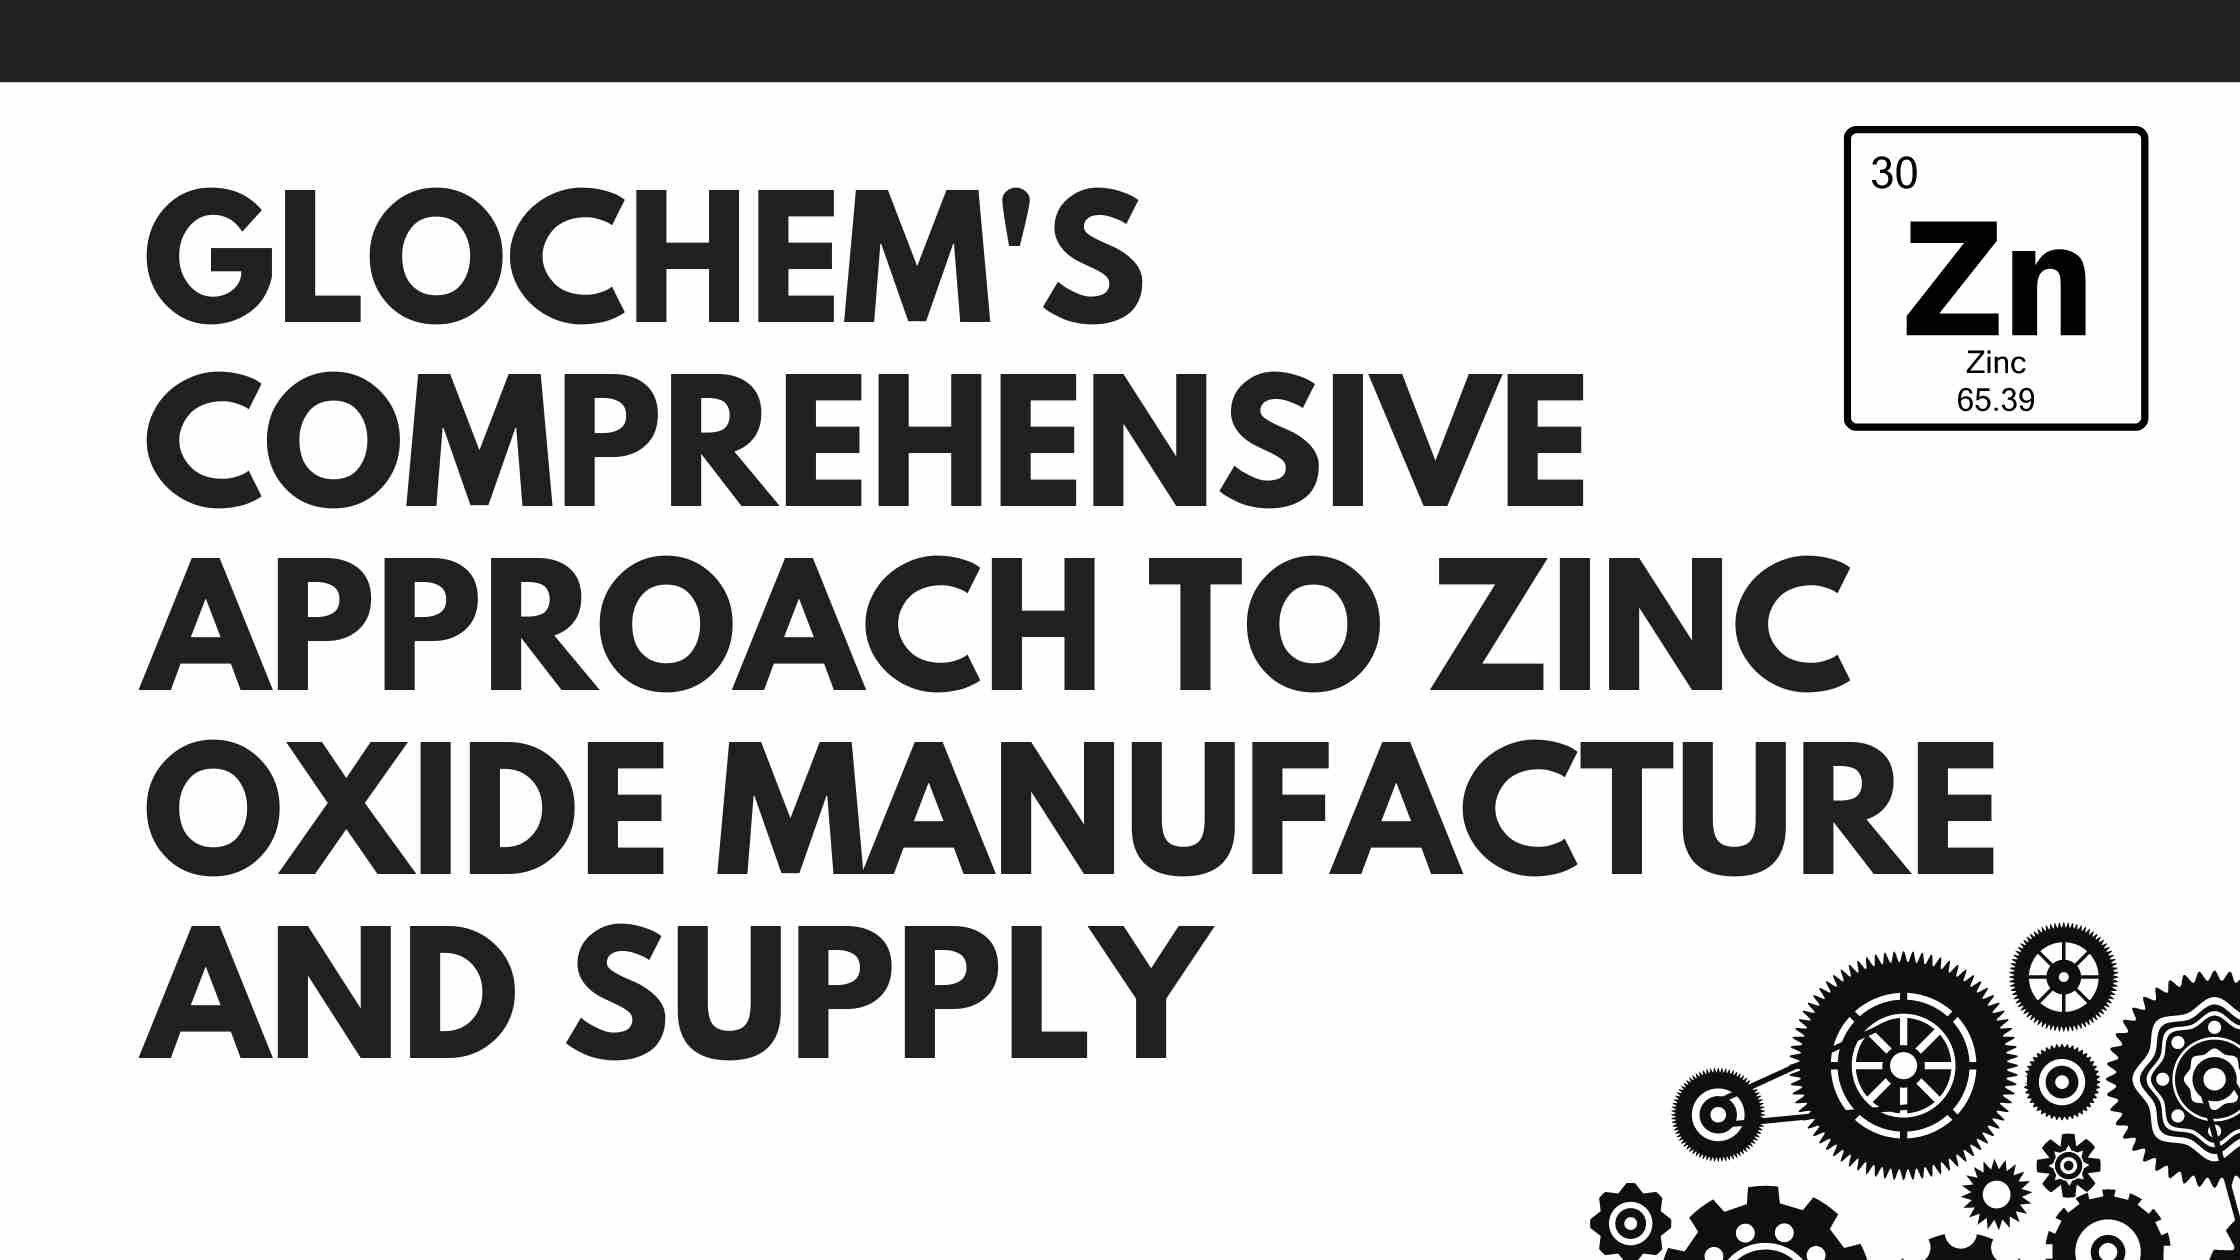 Glochem’s Comprehensive Approach to Zinc Oxide Manufacture and Supply